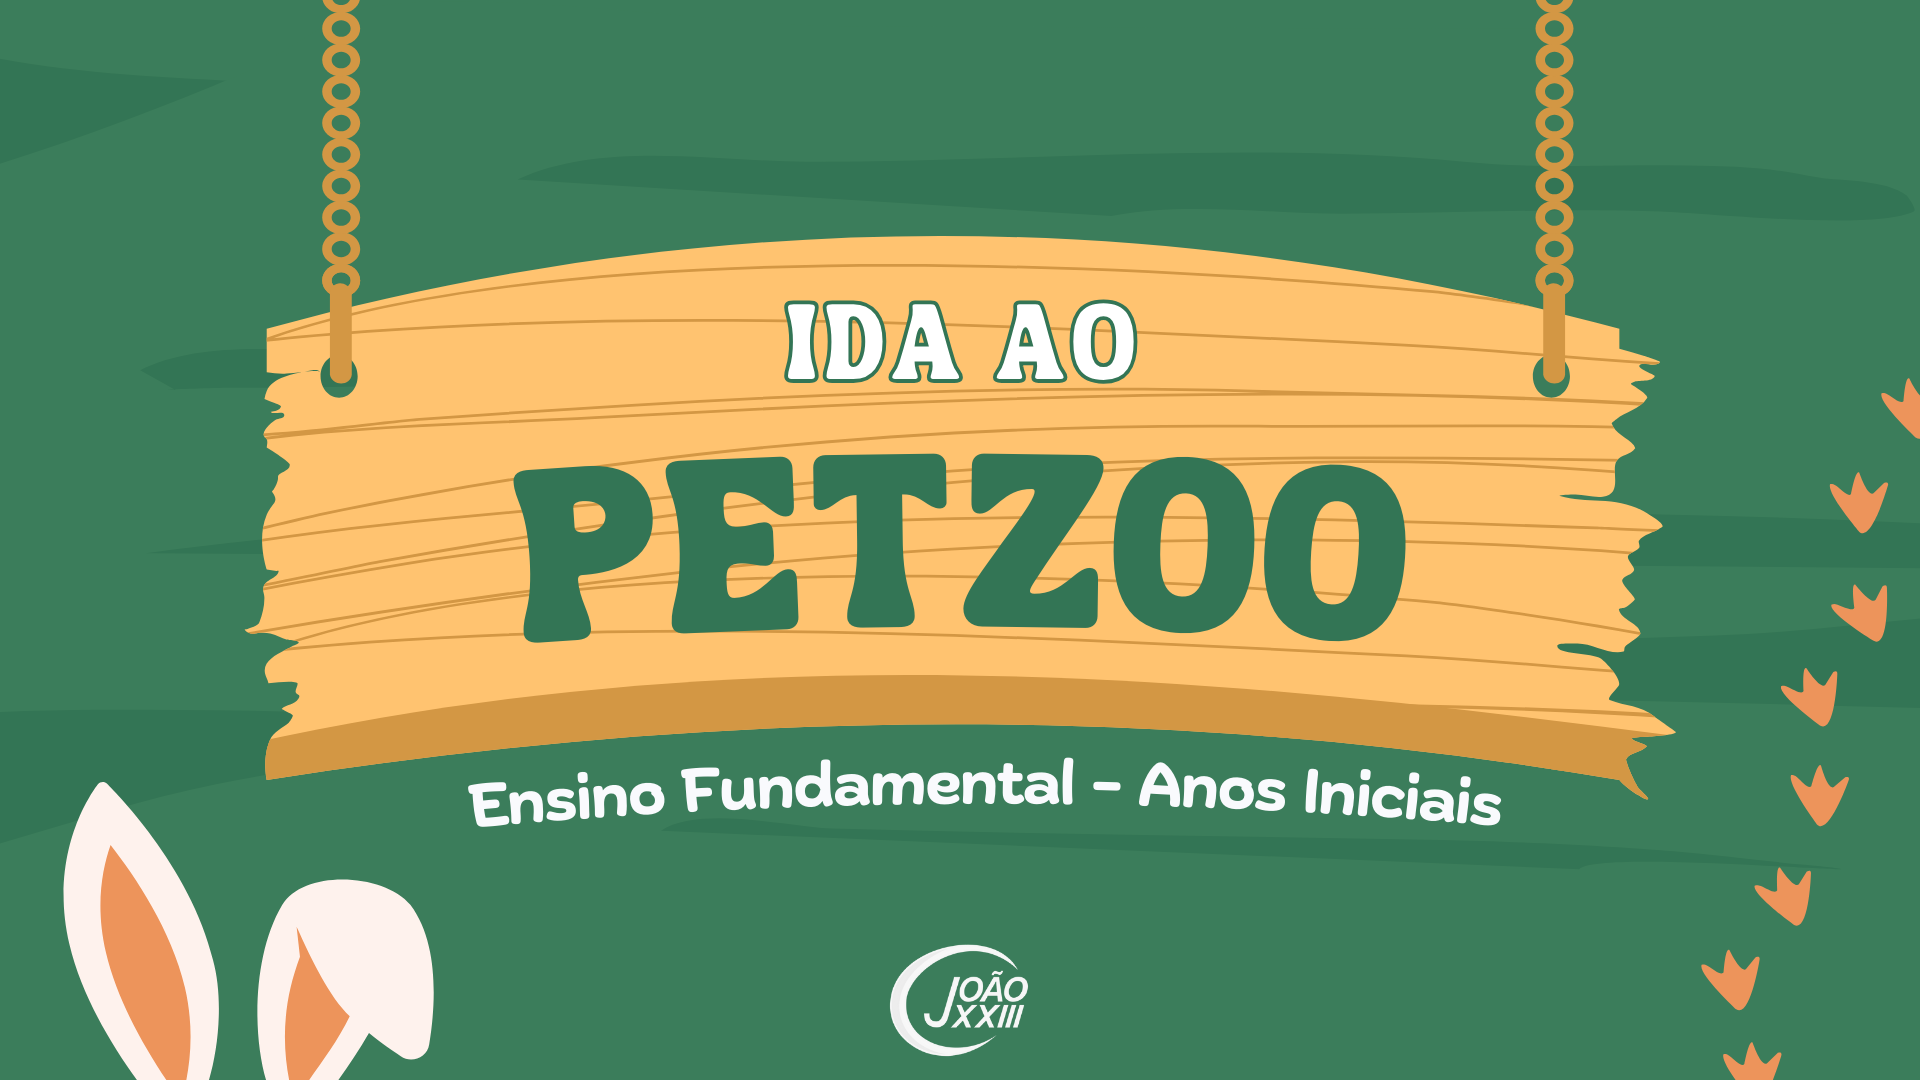 You are currently viewing Ida ao Petzoo